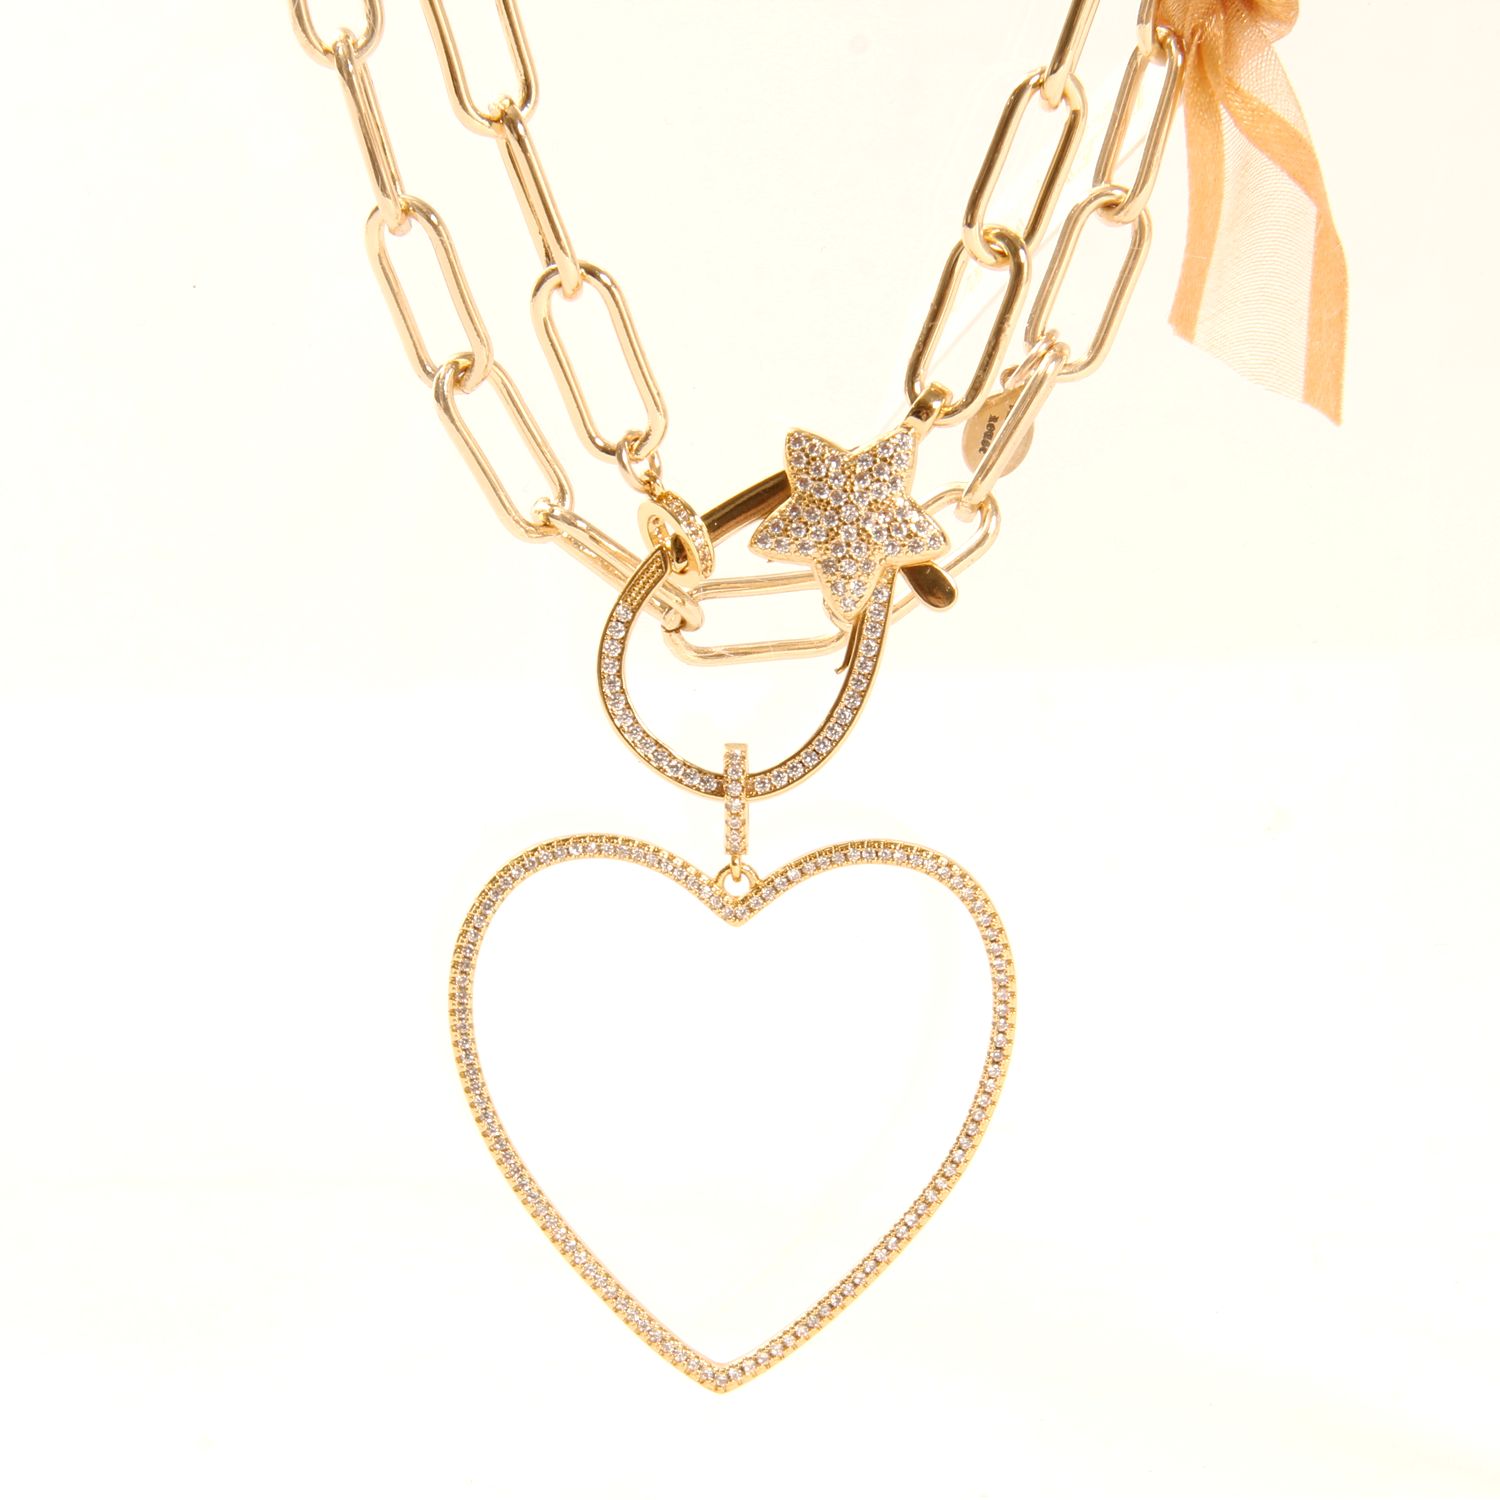 Valentine Rouge Jewellery: Open Heart Gold Necklace Product Image 3 of 3